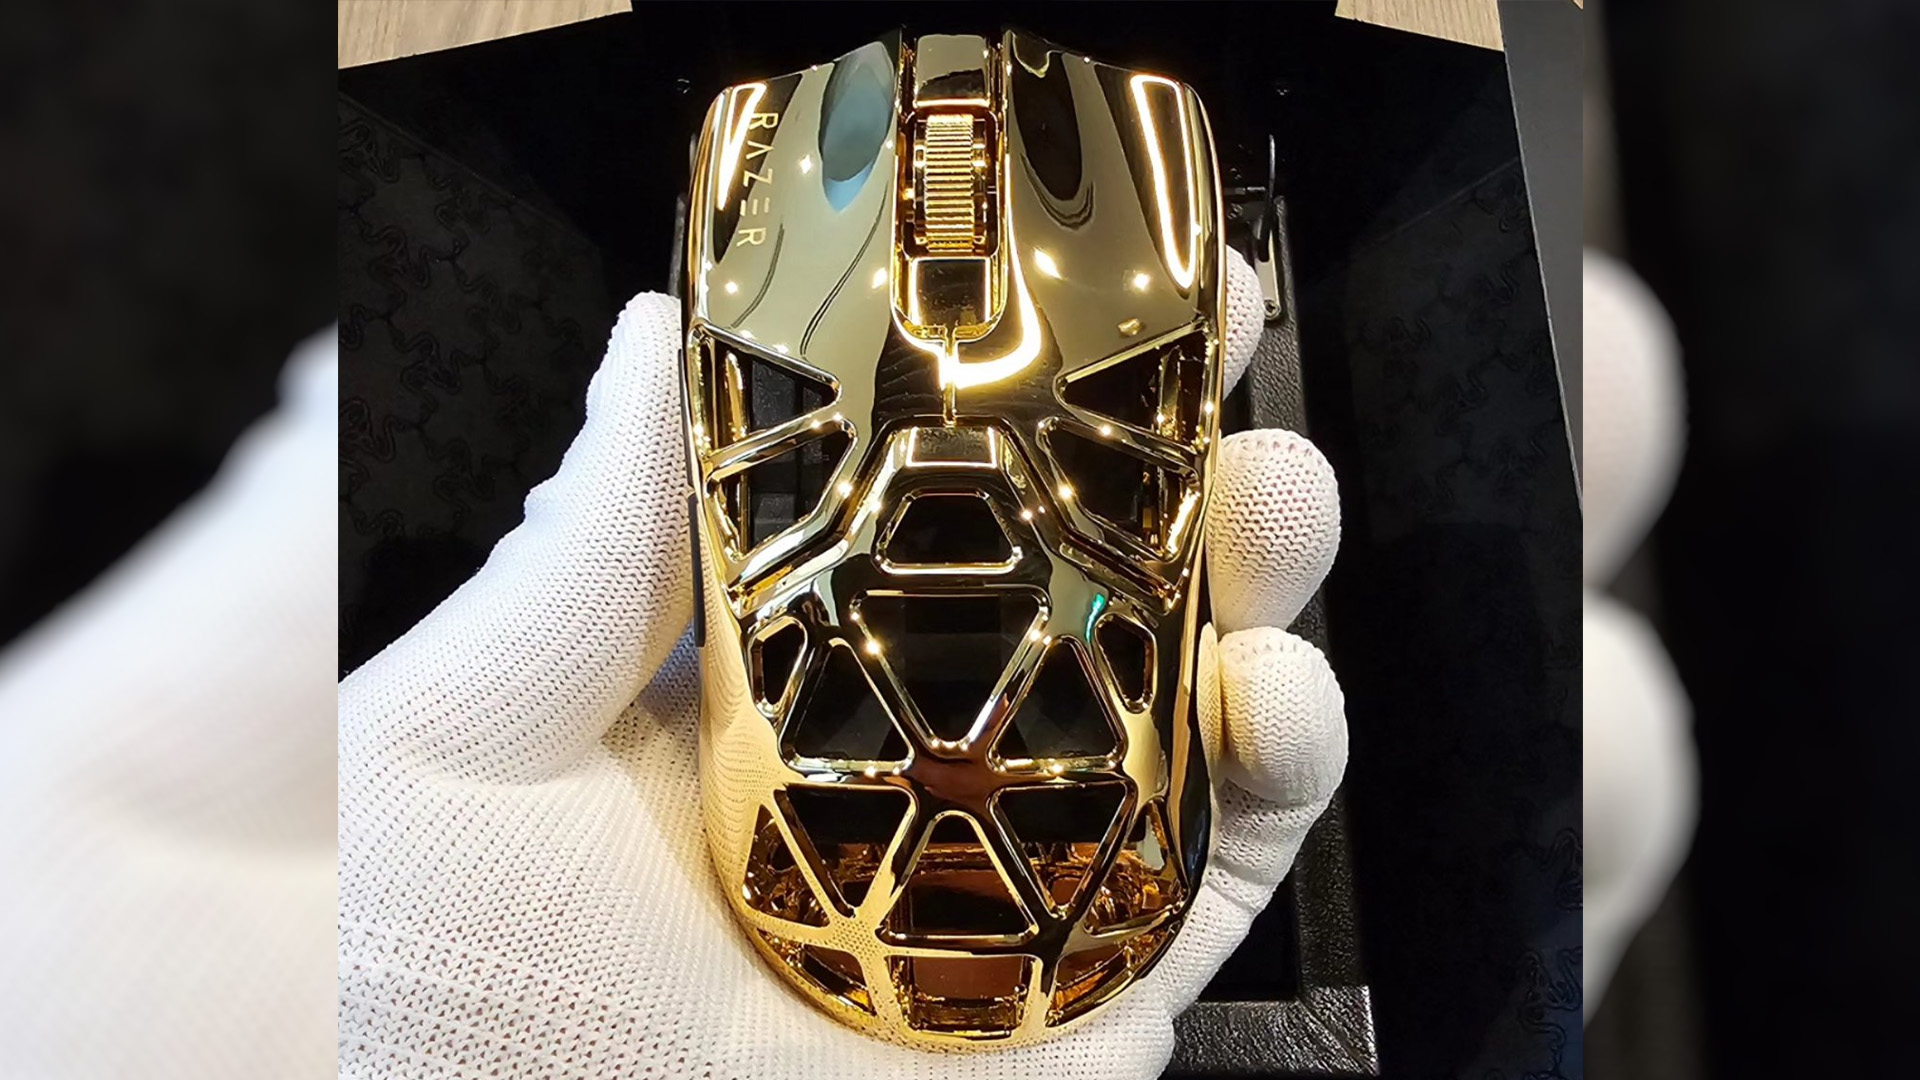 This 24 karat gold Razer gaming mouse is giving off major Scrooge